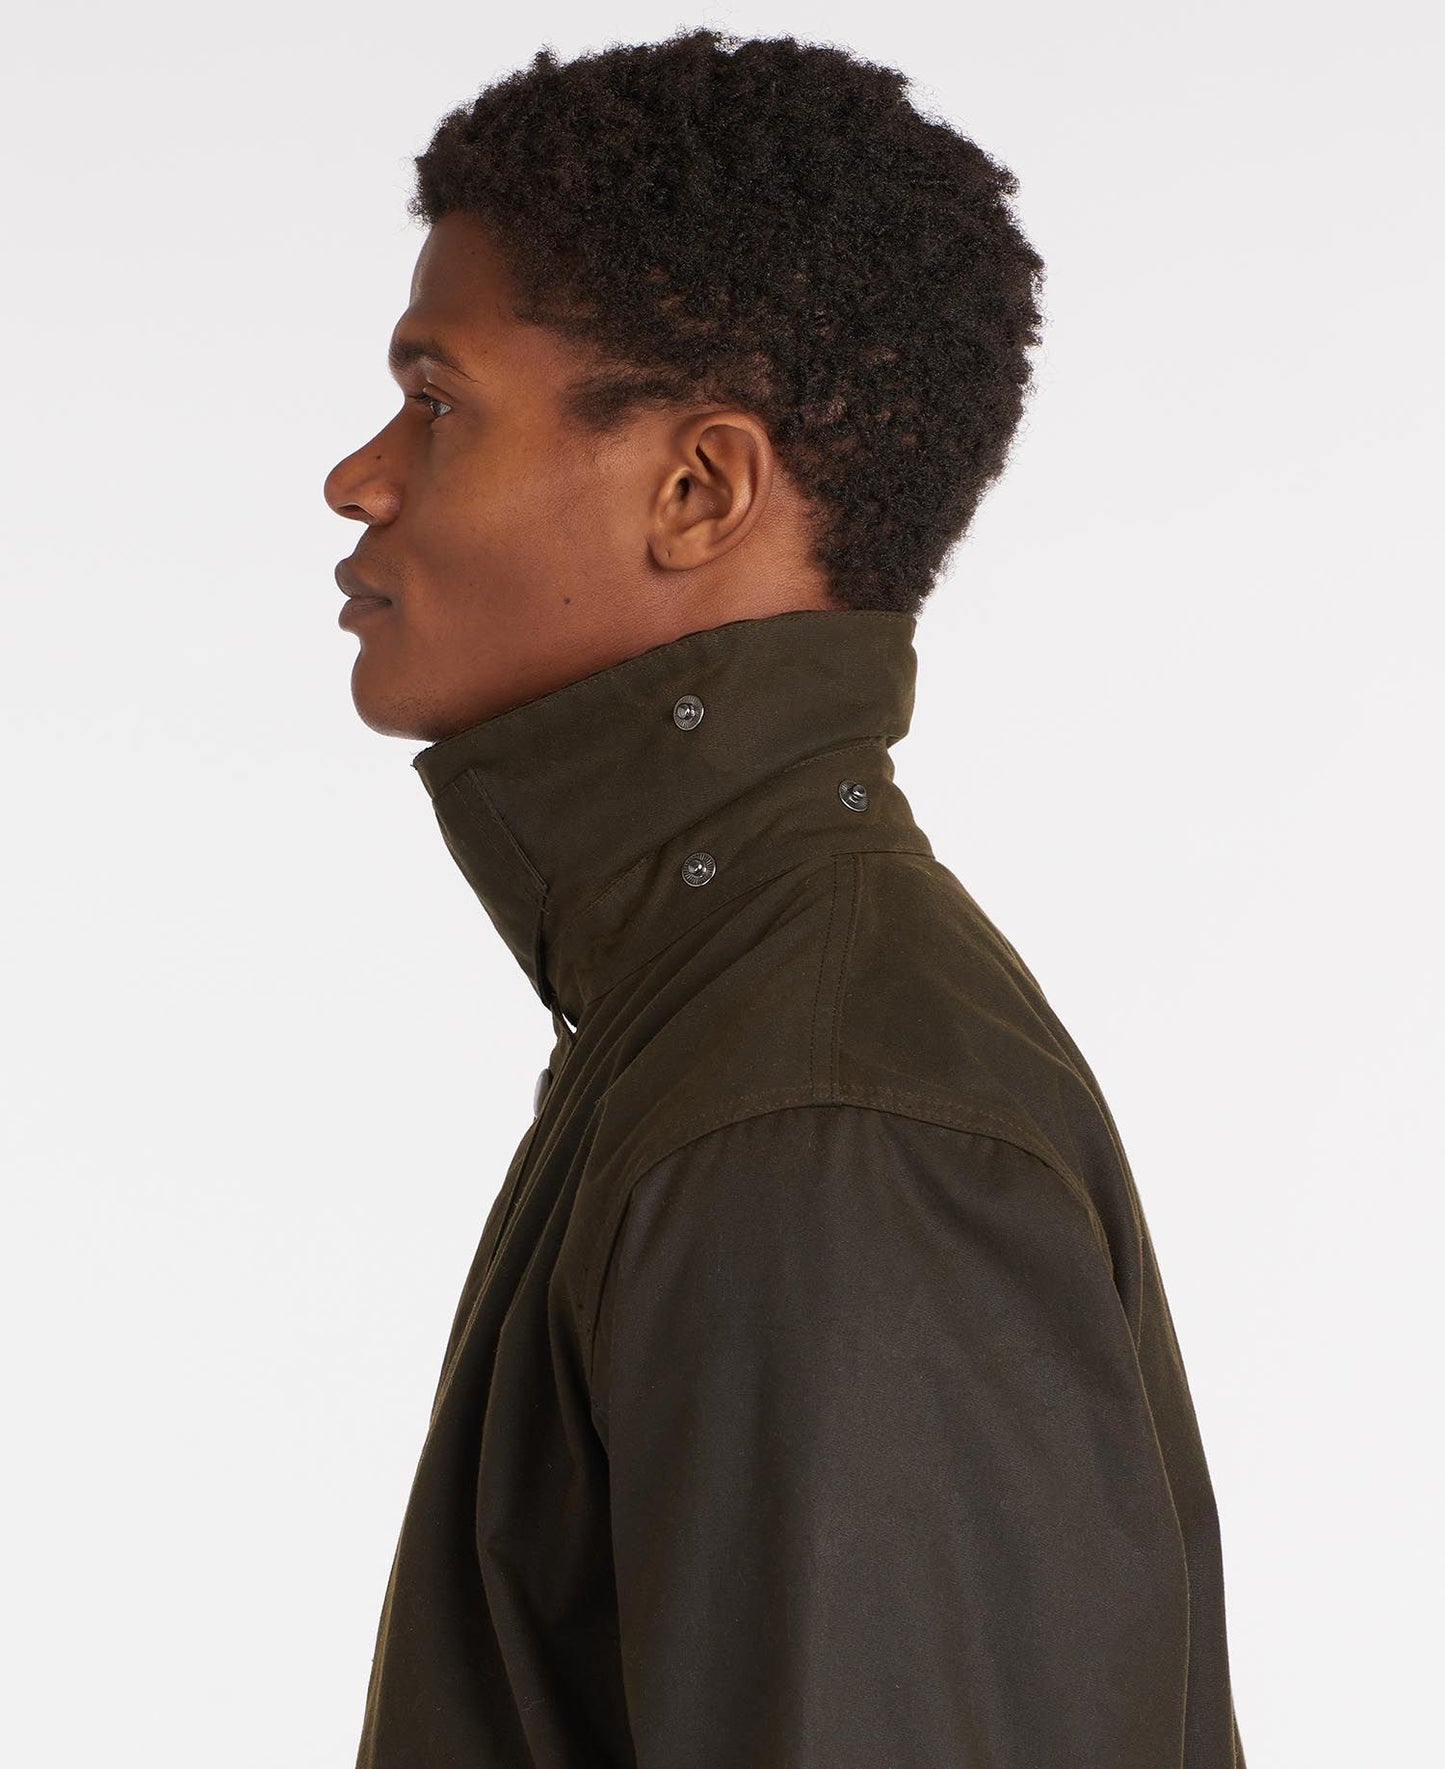 Barbour Classic Northumbria Waxed Jacket